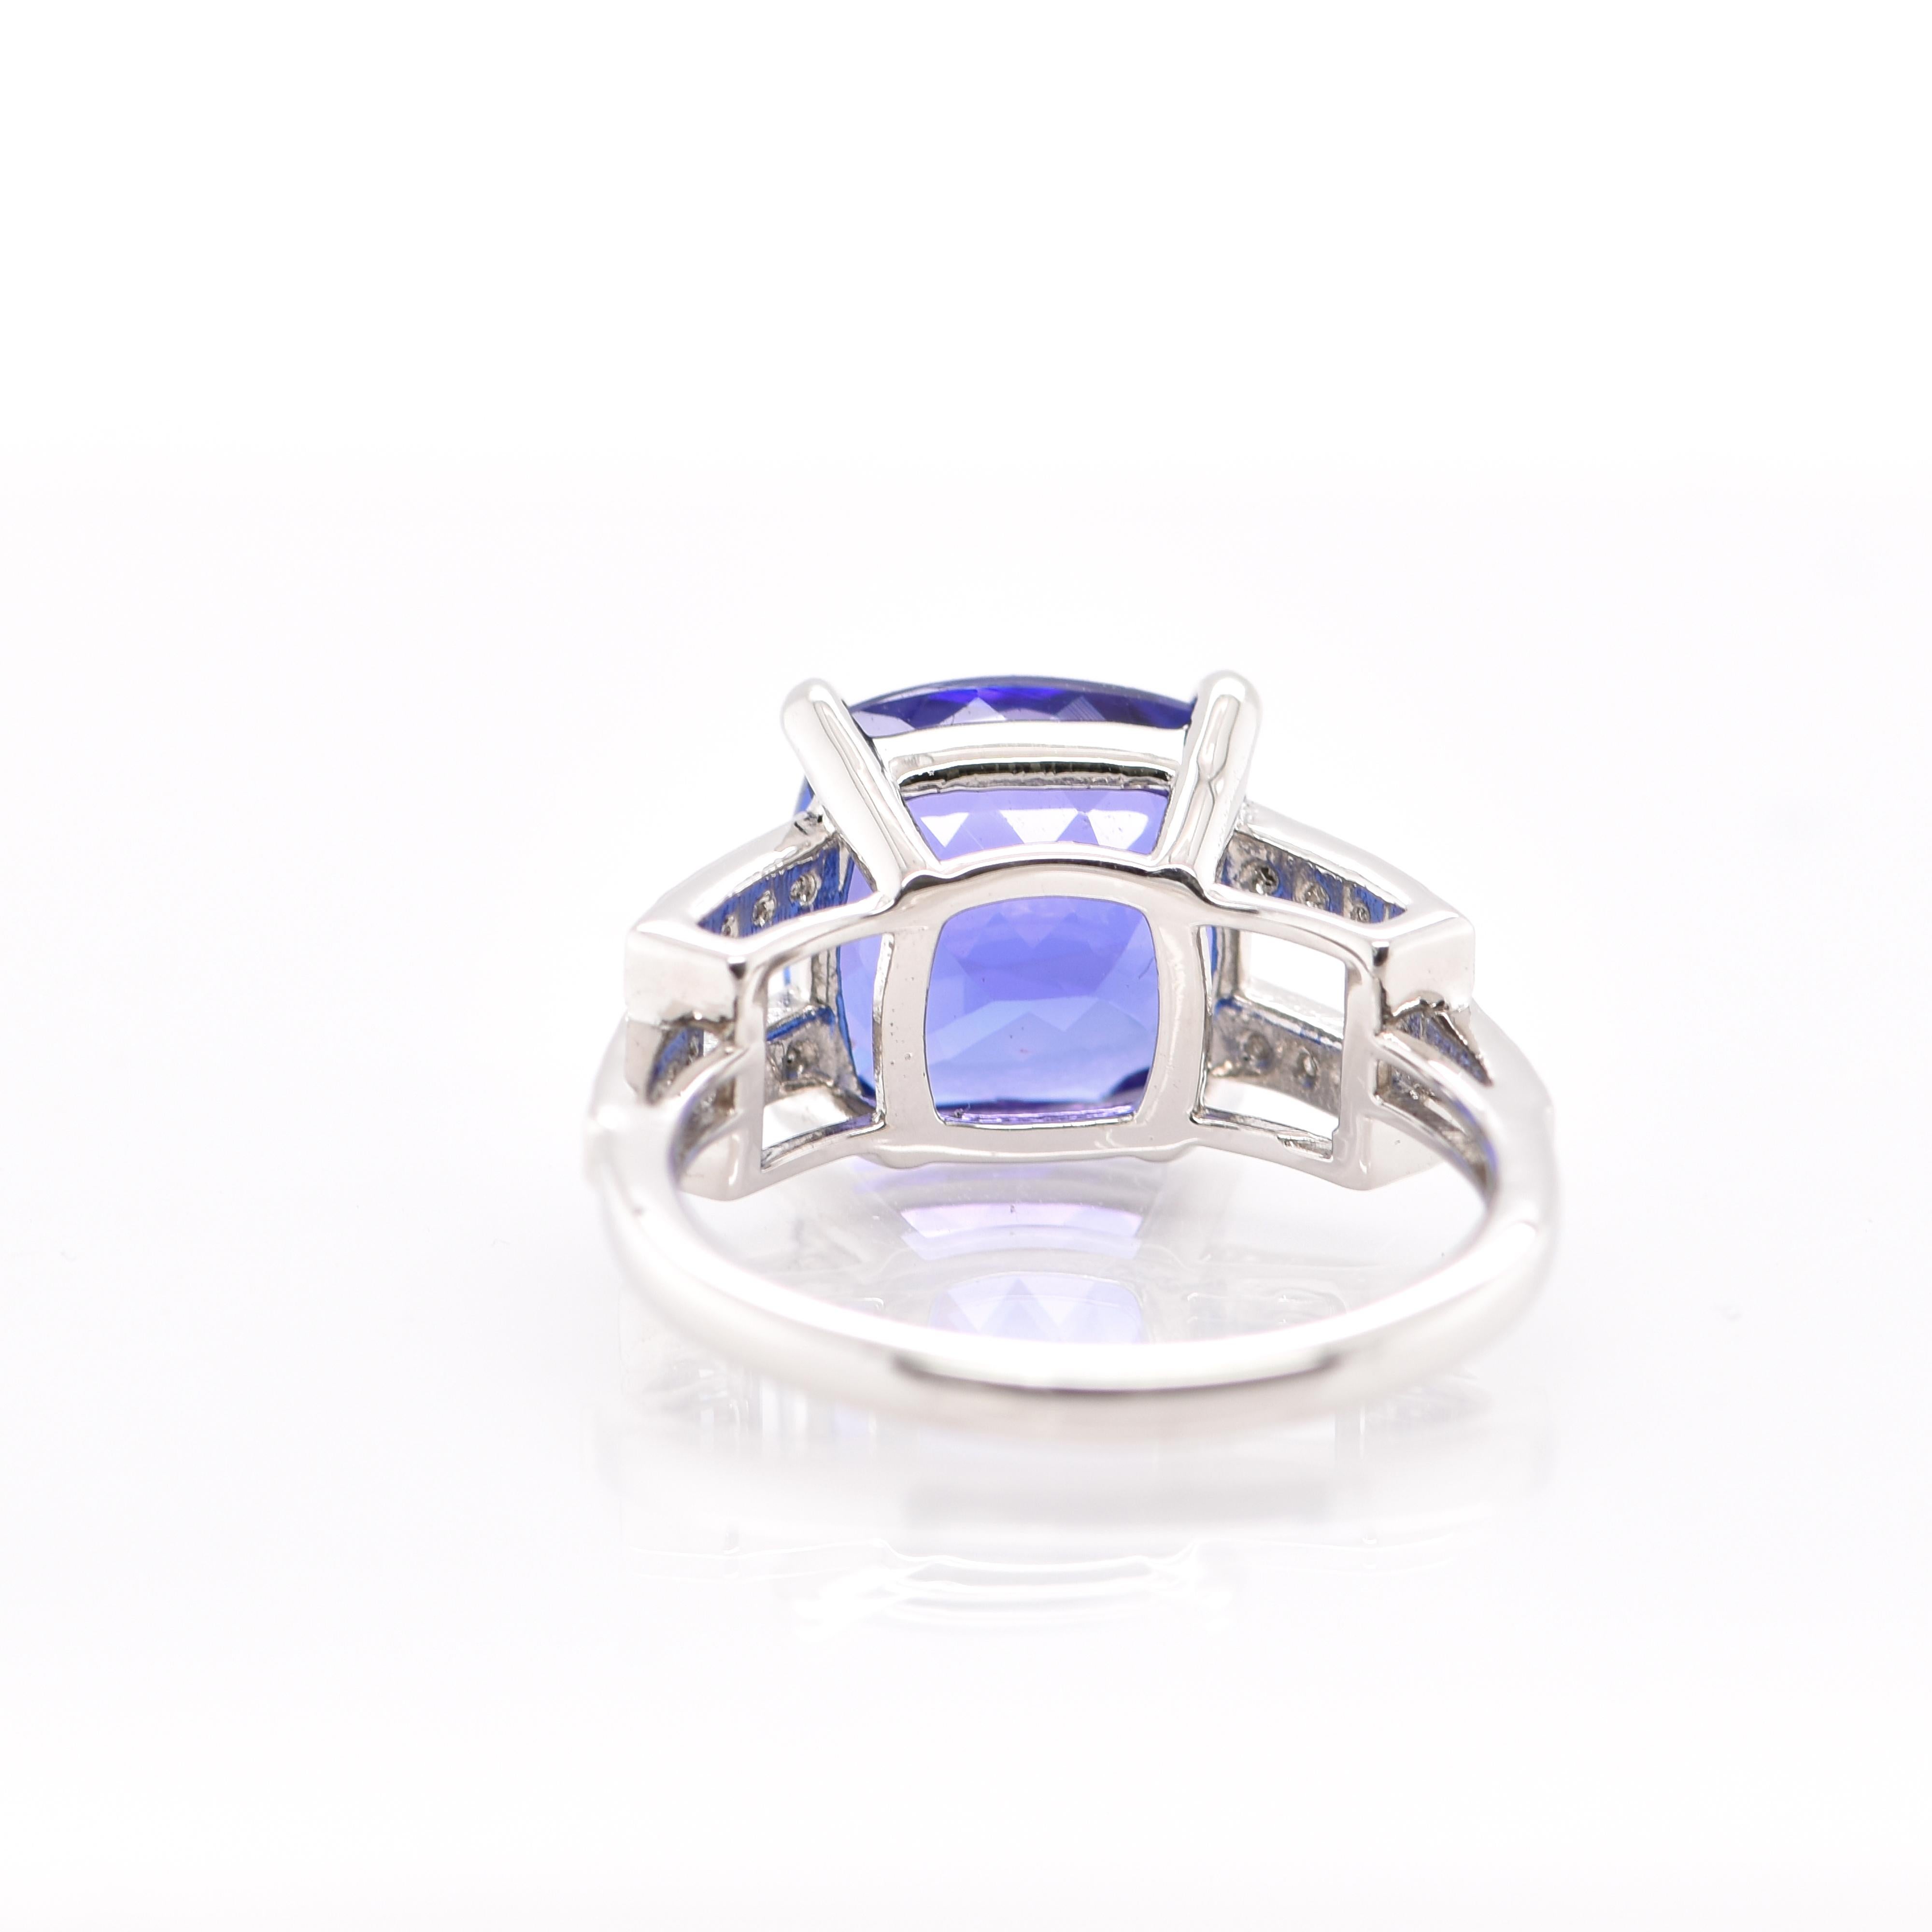 A beautiful Cocktail Ring featuring a 5.30 Carat Tanzanite and 0.16 Carats of Diamond Accents set in Platinum. Tanzanite's name was given by Tiffany and Co after its only known source: Tanzania. Tanzanite displays beautiful pleochroic colors meaning